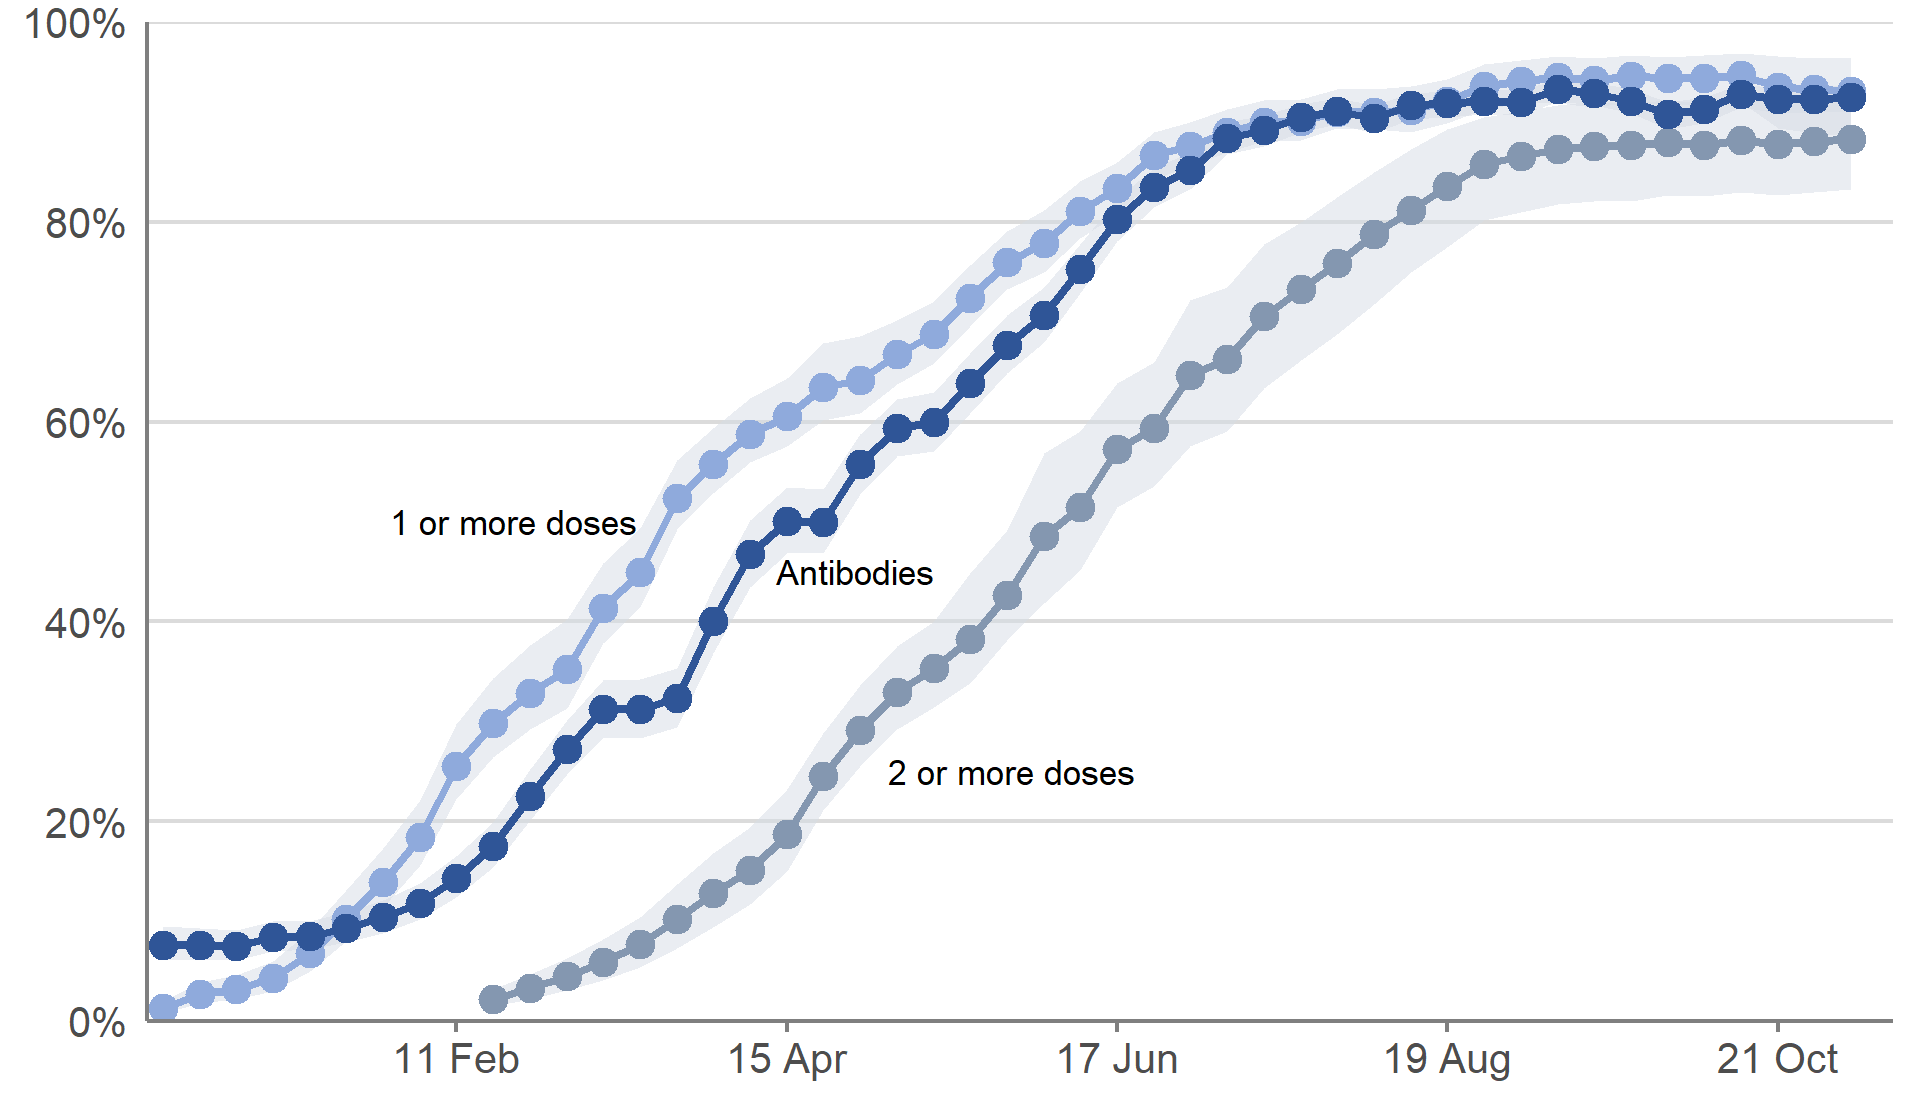 This chart shows modelled weekly estimates of the percentage of people in the community population that have received one or more doses of a COVID-19 vaccine and modelled weekly estimates of the percentage of people testing positive for antibodies to SARS-CoV-2 from a blood sample, from 7 December 2020  to the week beginning 1 November 2021.   There is a clear pattern between vaccination and testing positive for antibodies to SARS-CoV-2 (the specific virus that causes COVID-19), but the detection of antibodies alone is not a precise measure of the immunity protection given by vaccination.